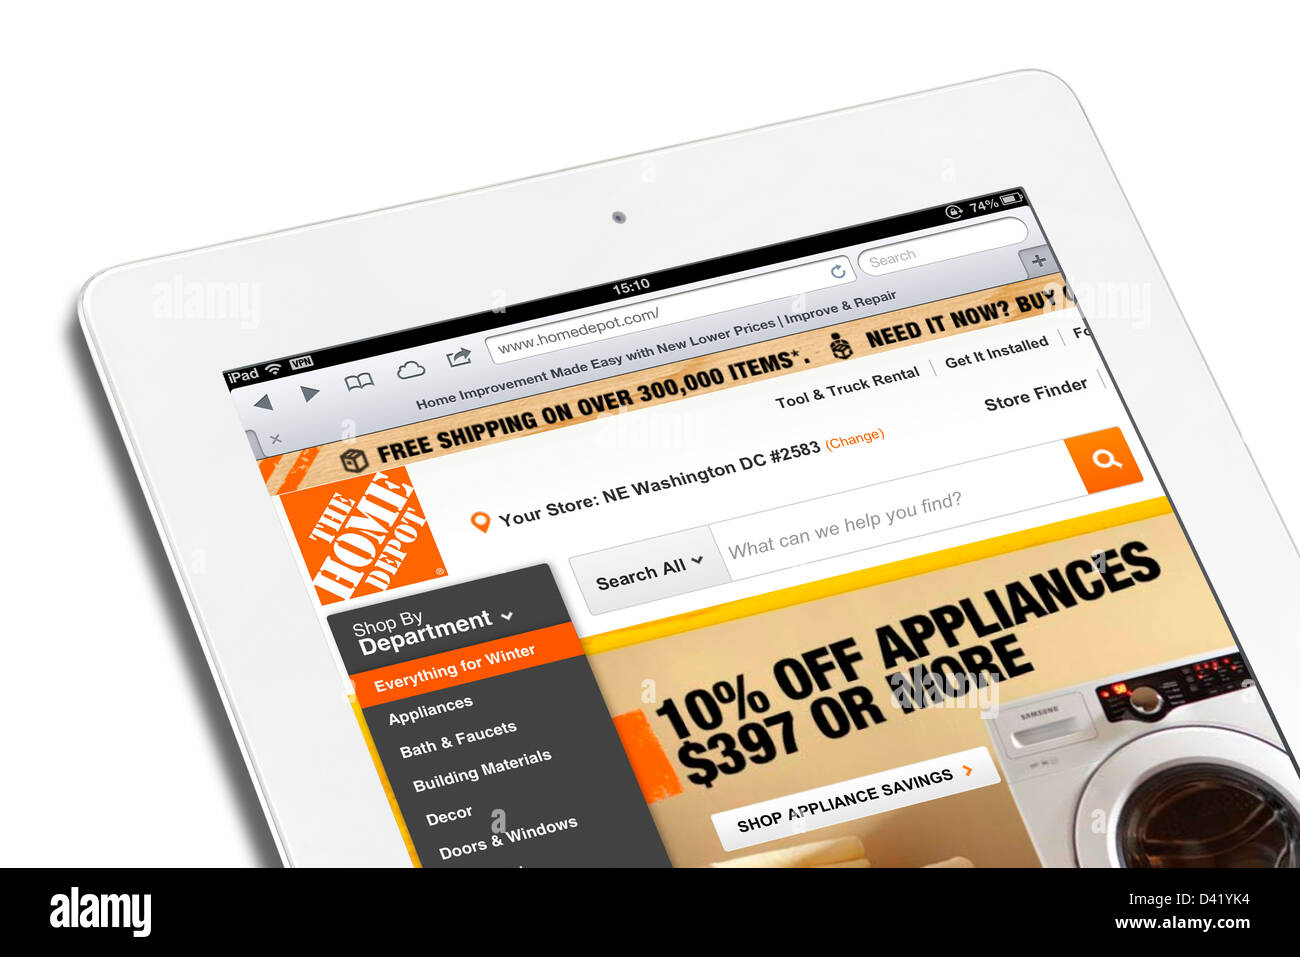 Online shopping website of The Home Depot, viewed on an iPad 4, USA Stock Photo